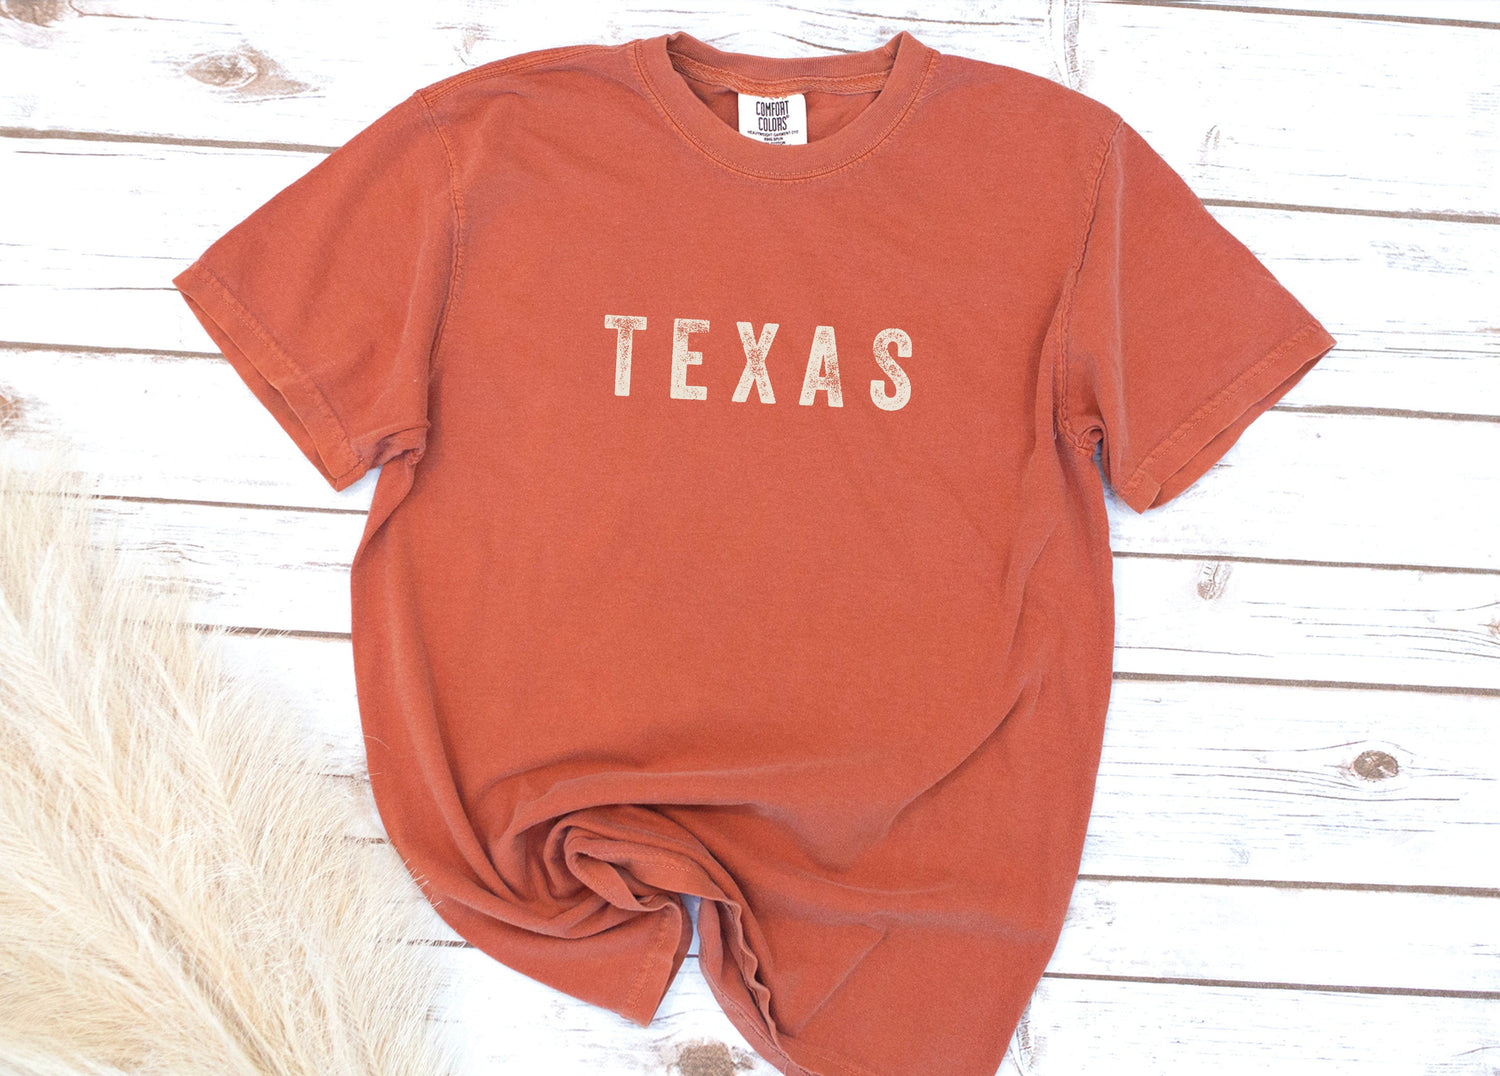 Are There Specific Colors Associated With Texas Clothing?